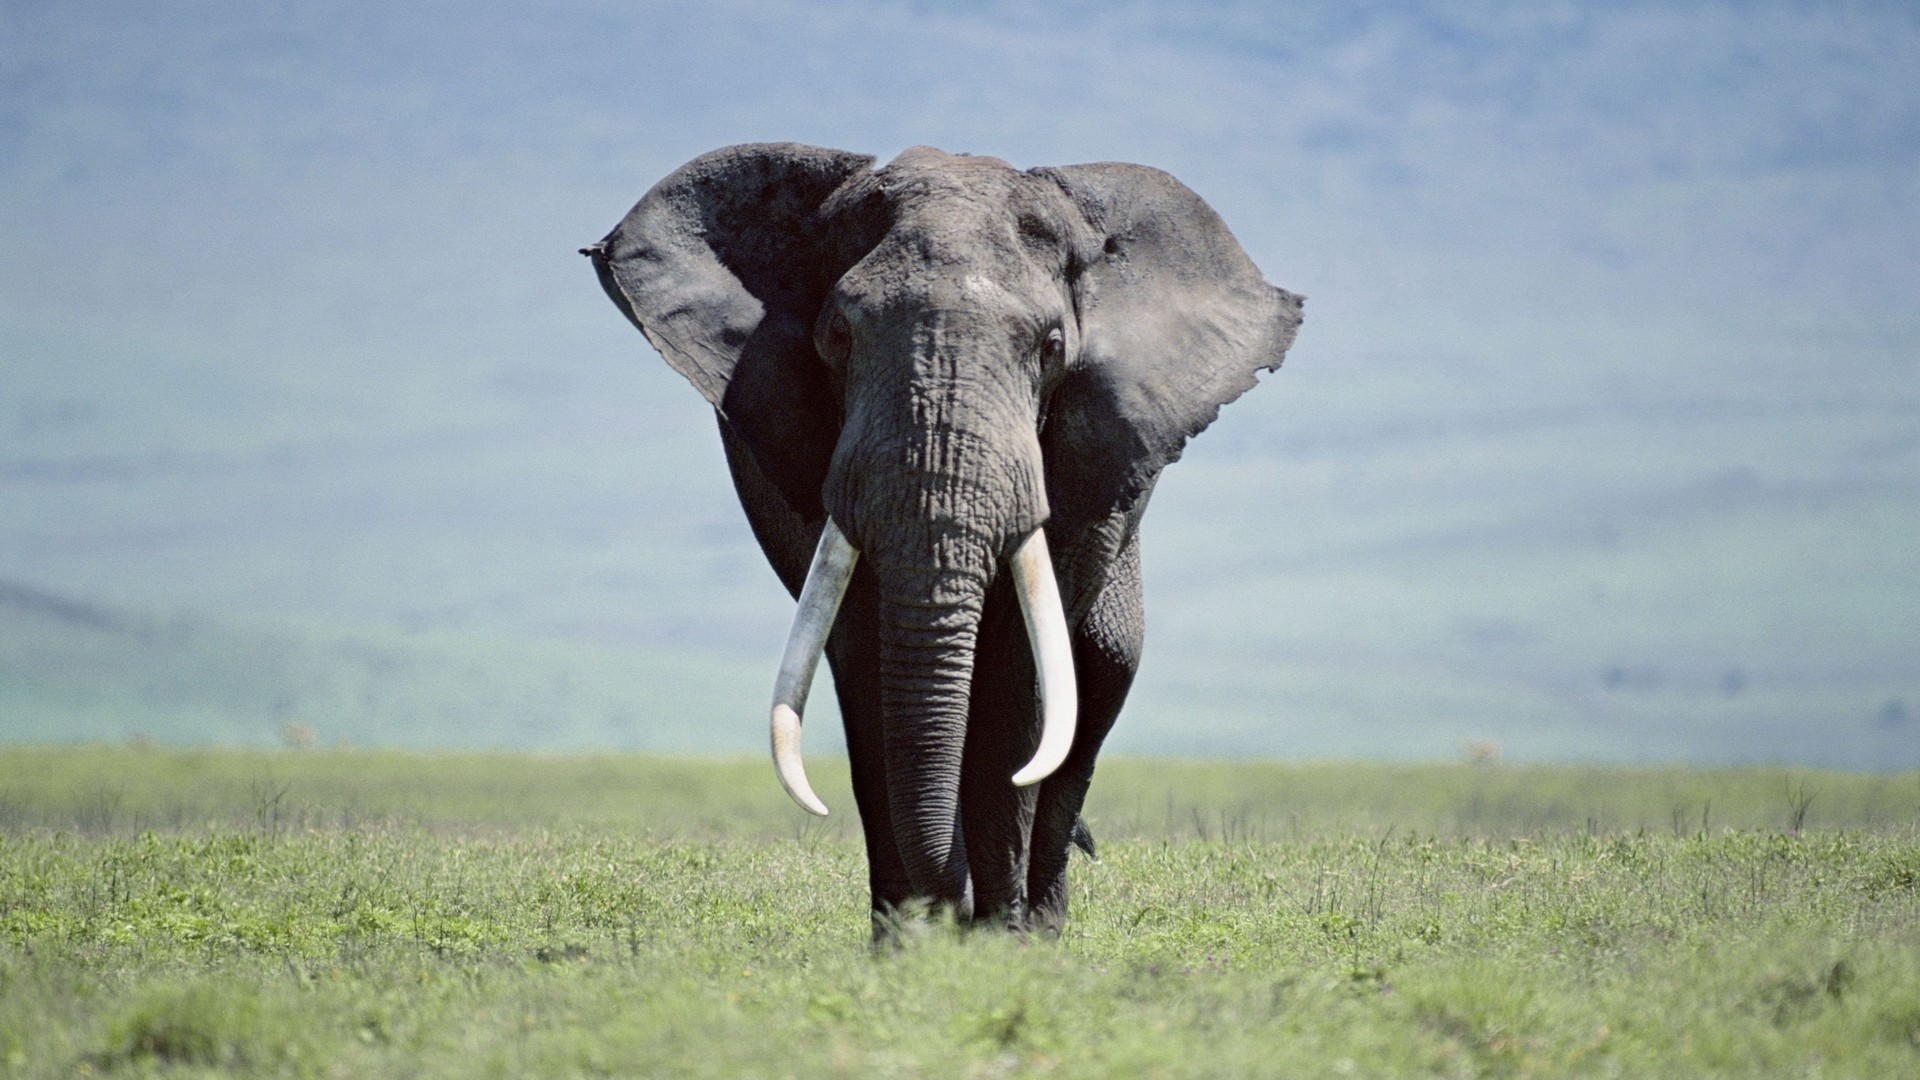 1920x1080 Elephant HD Wallpapers Backgrounds Wallpaper | HD Wallpapers | Pinterest |  Elephant background, Hd wallpaper and Wallpaper